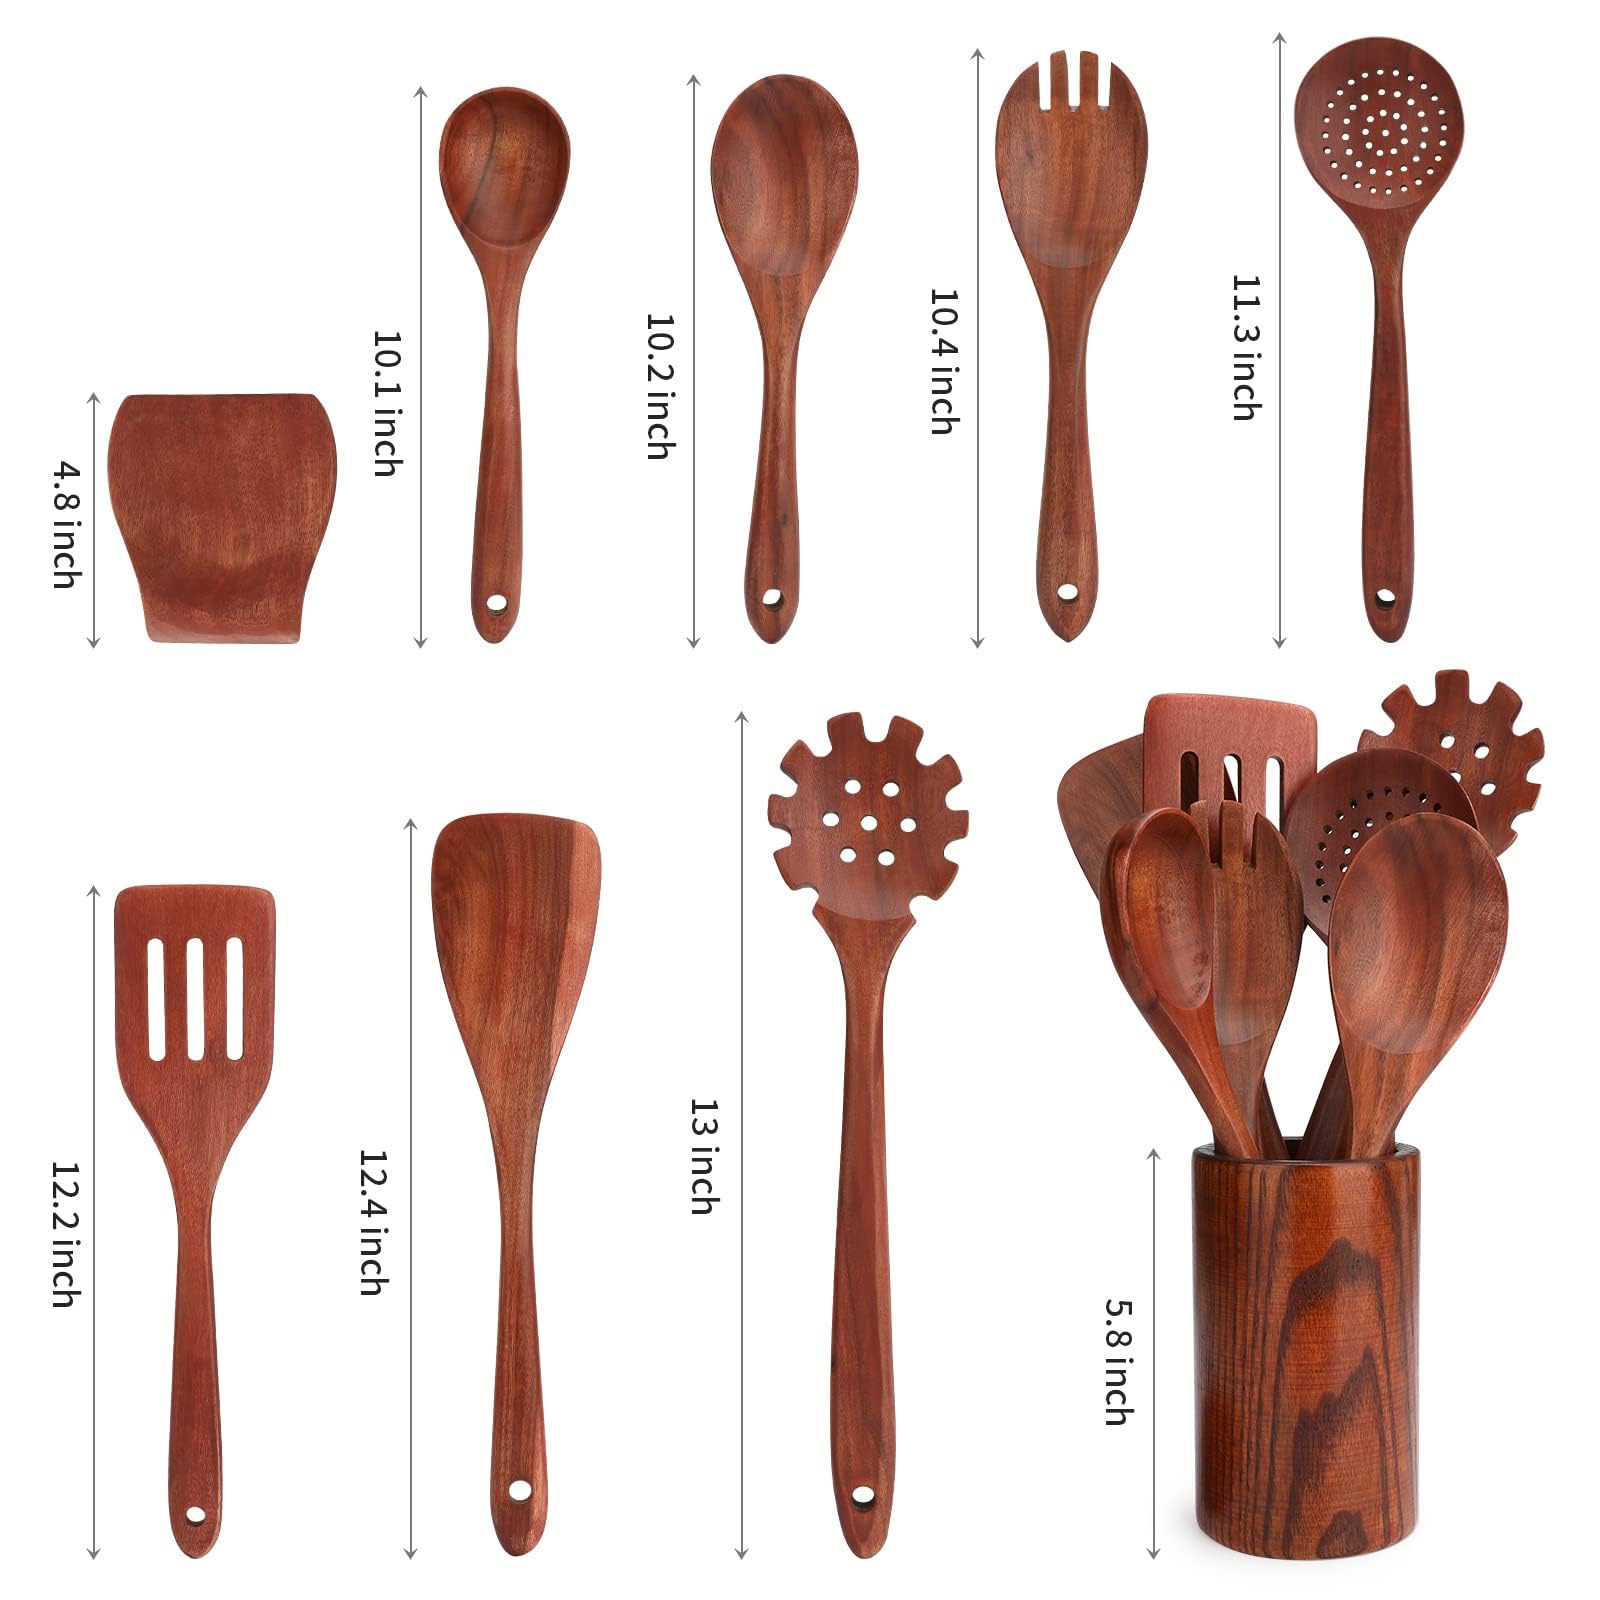 Kitchen Utensils Set,16 Pcs,Wooden Spoons for Cooking, Natural Teak Nonstick Spatula with Spoon Rest, Comfort Grip,Premium Quality House Warm Sweet Gifts